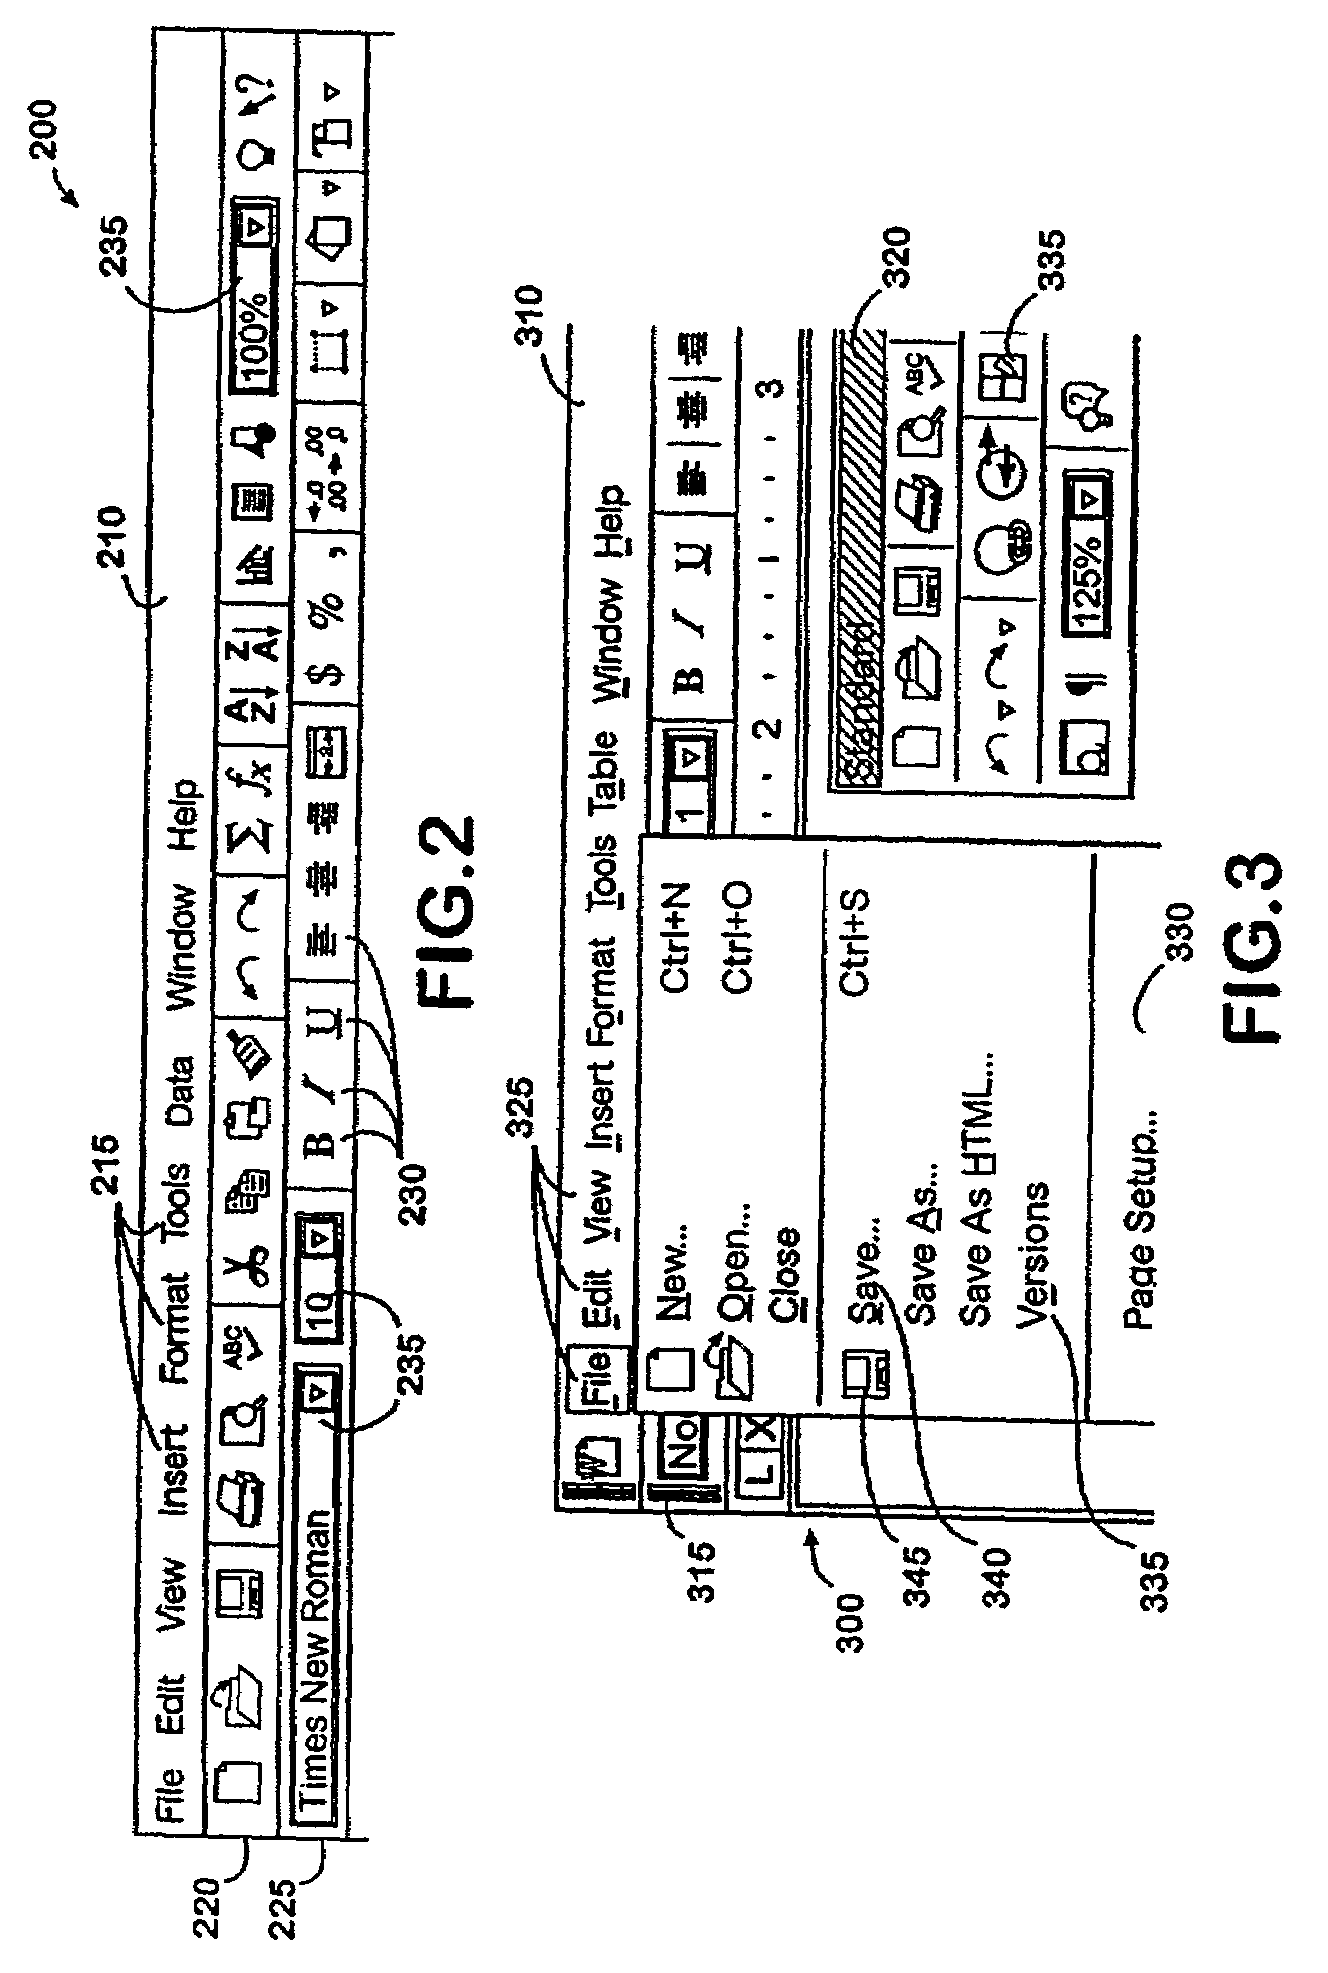 Method for displaying controls in a system using a graphical user interface